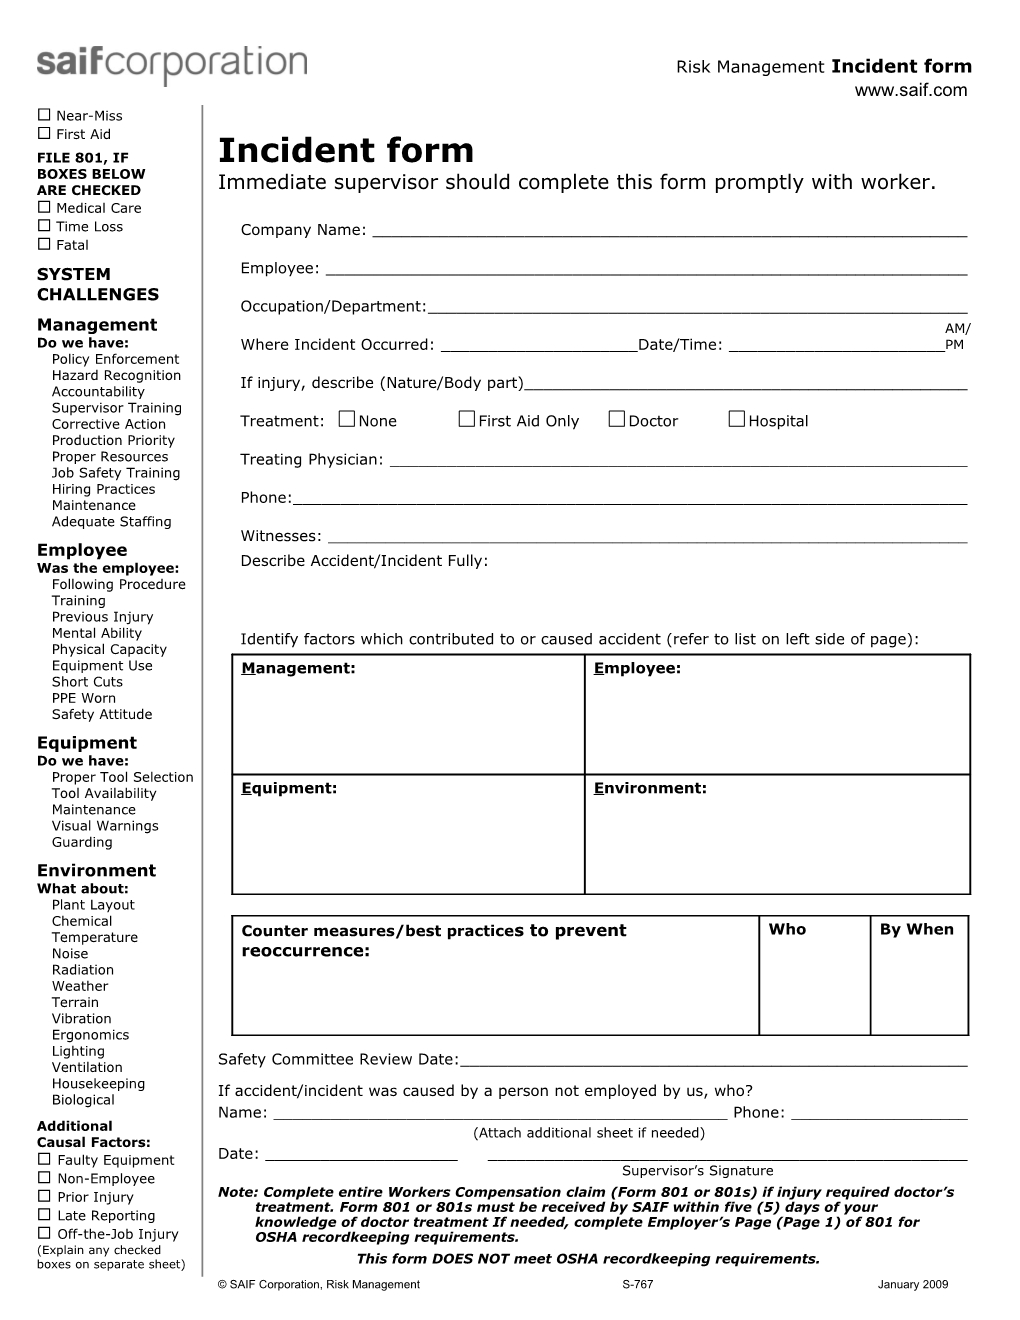 Accident Analysis, Incident Report Form